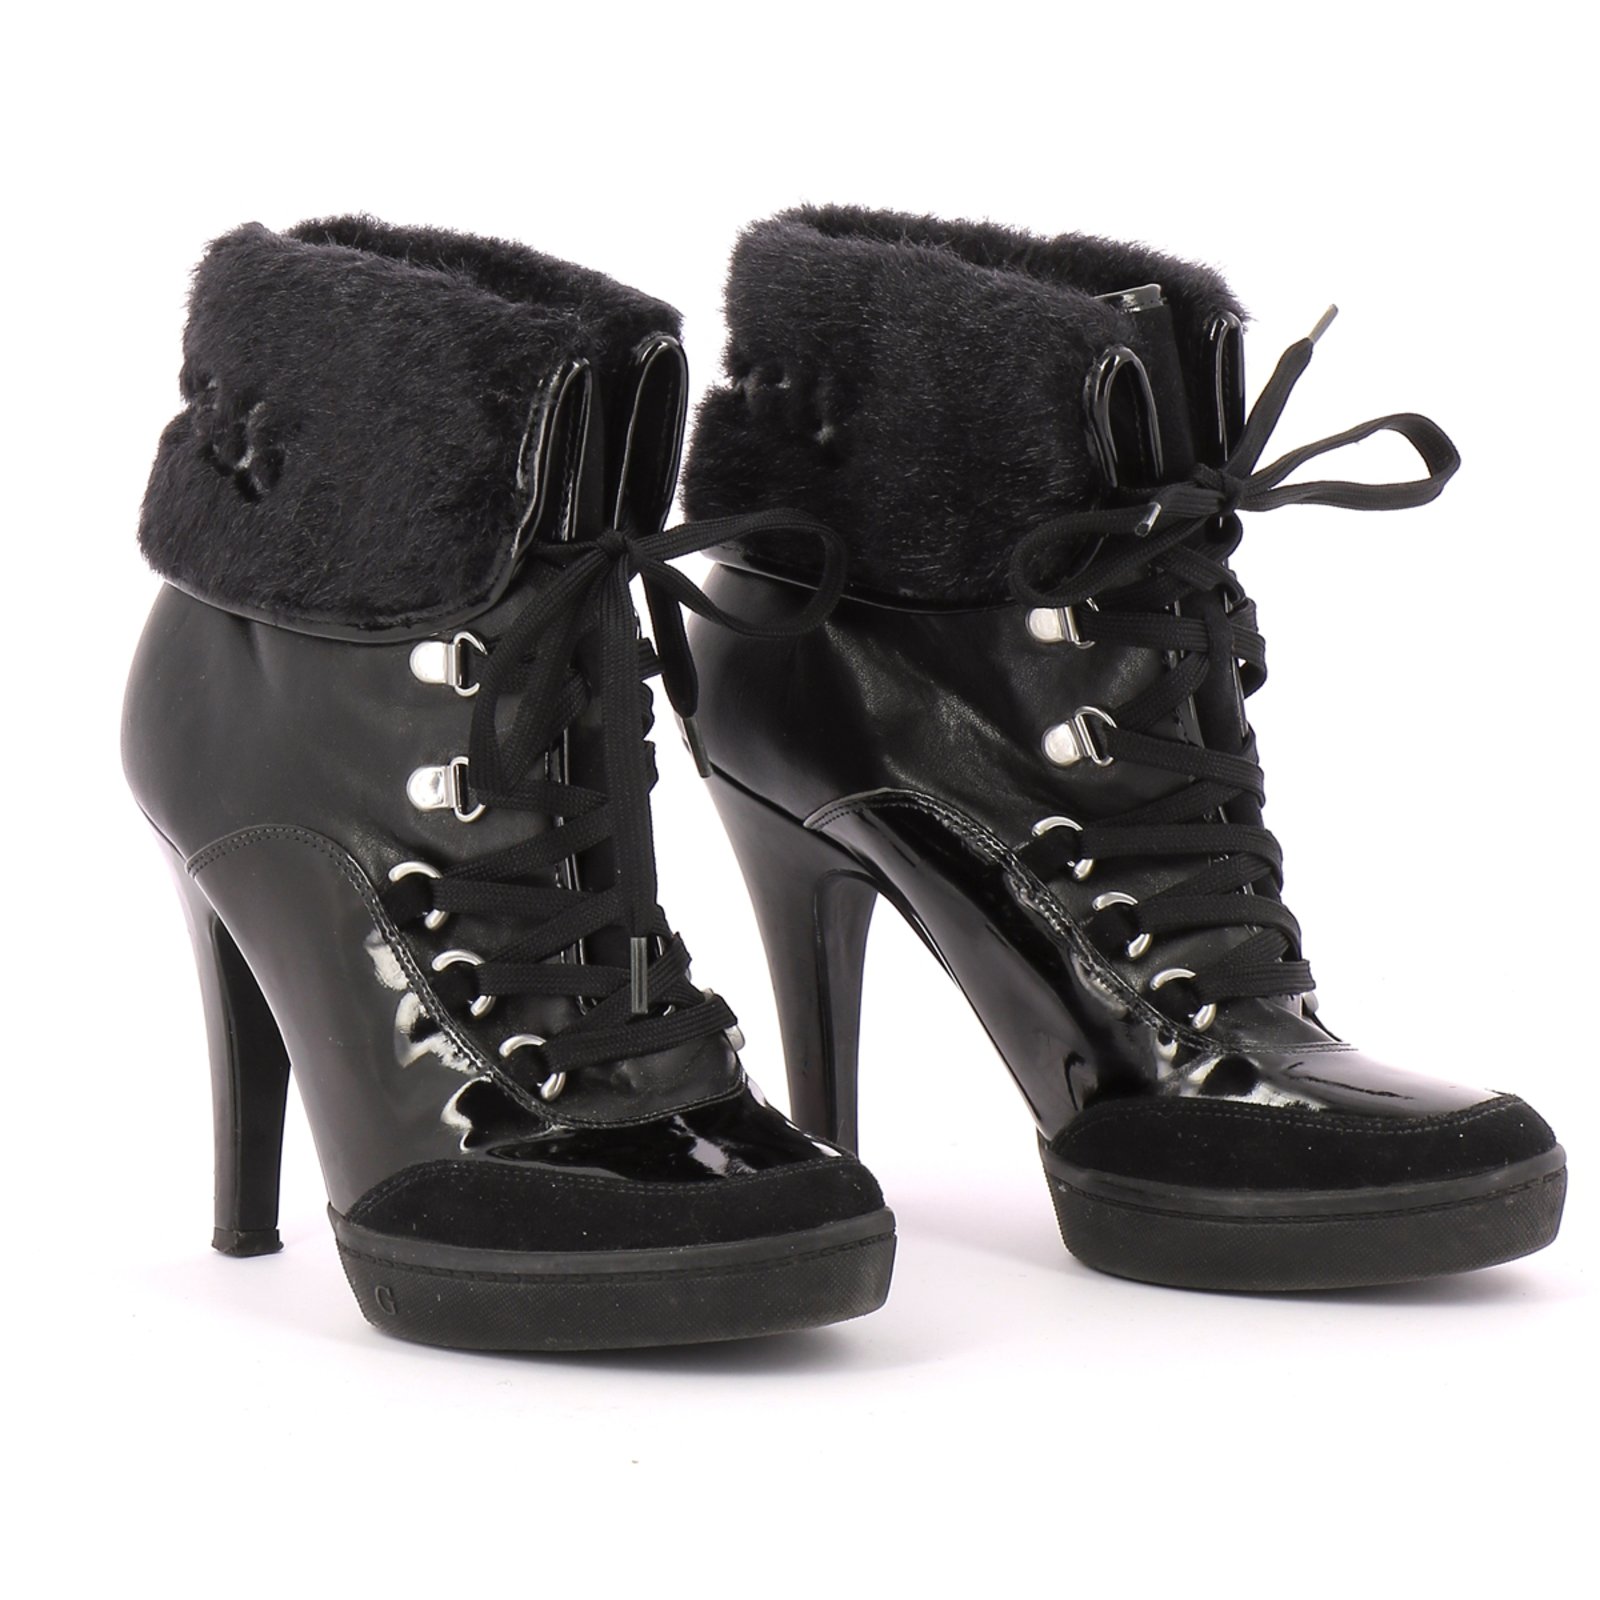 guess black ankle boots cheap 8bbfe ca0d8